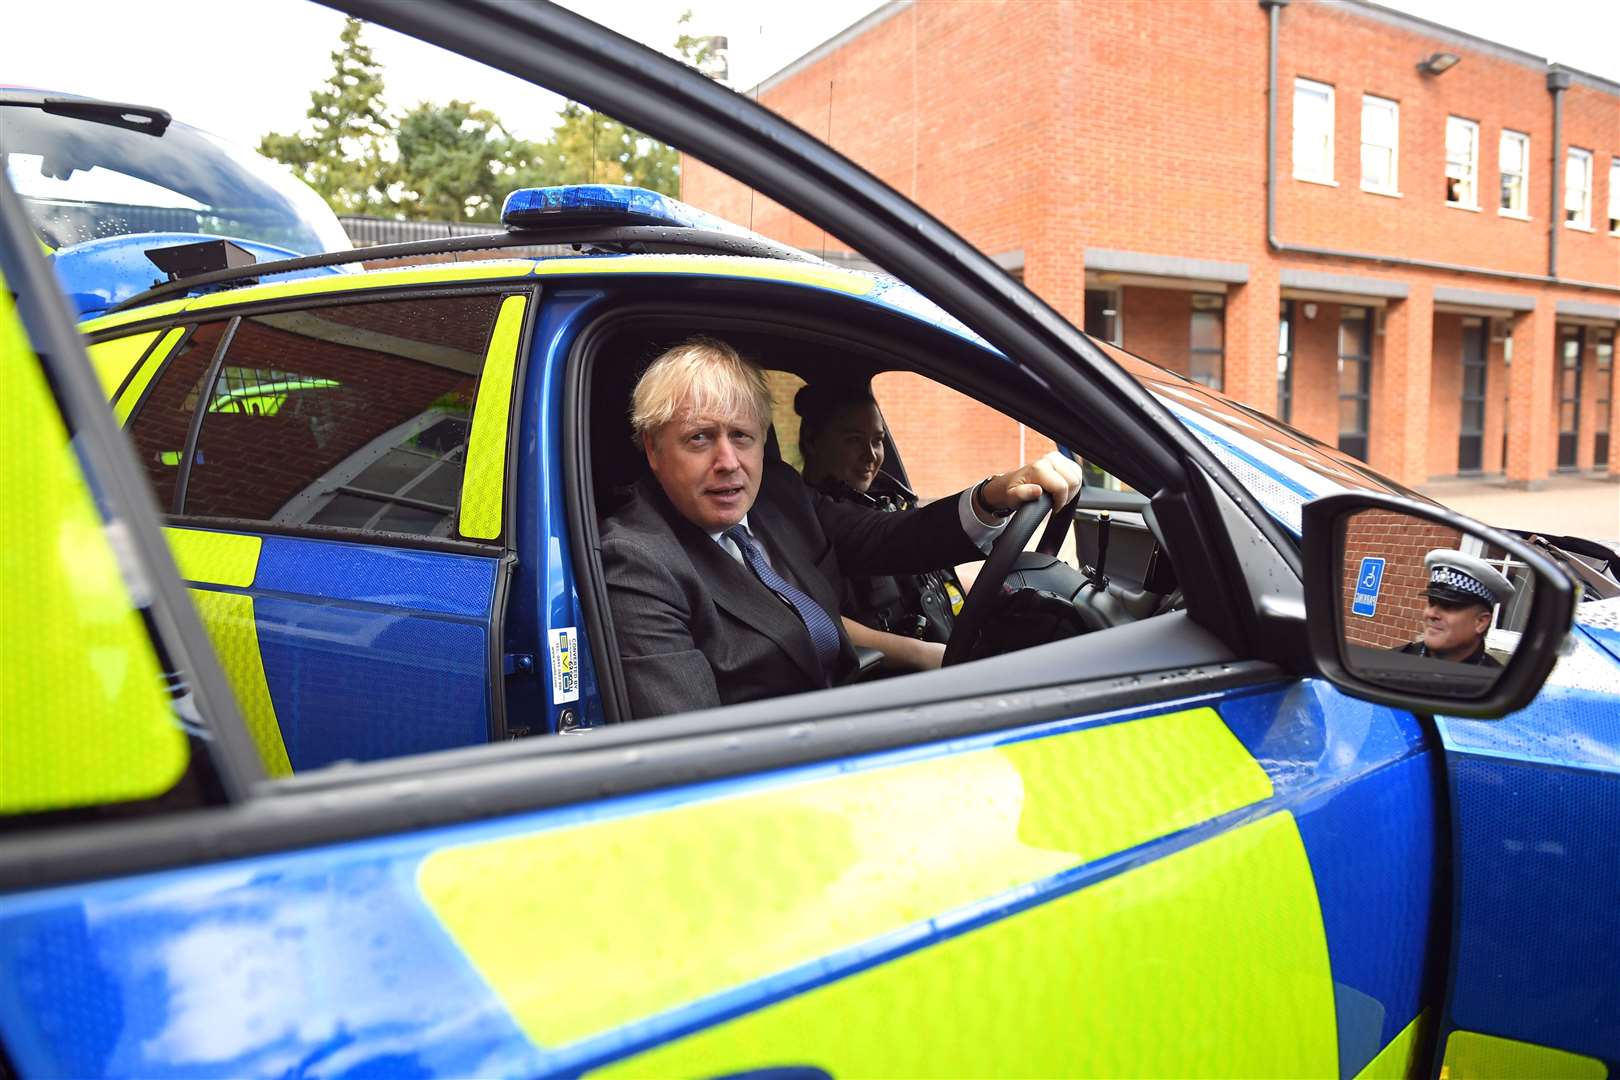 Prime Minister Boris Johnson sitting in the driver’s seat of a police vehicle during a visit to Northamptonshire Police headquarters in Northampton (Stefan Rousseau/PA)